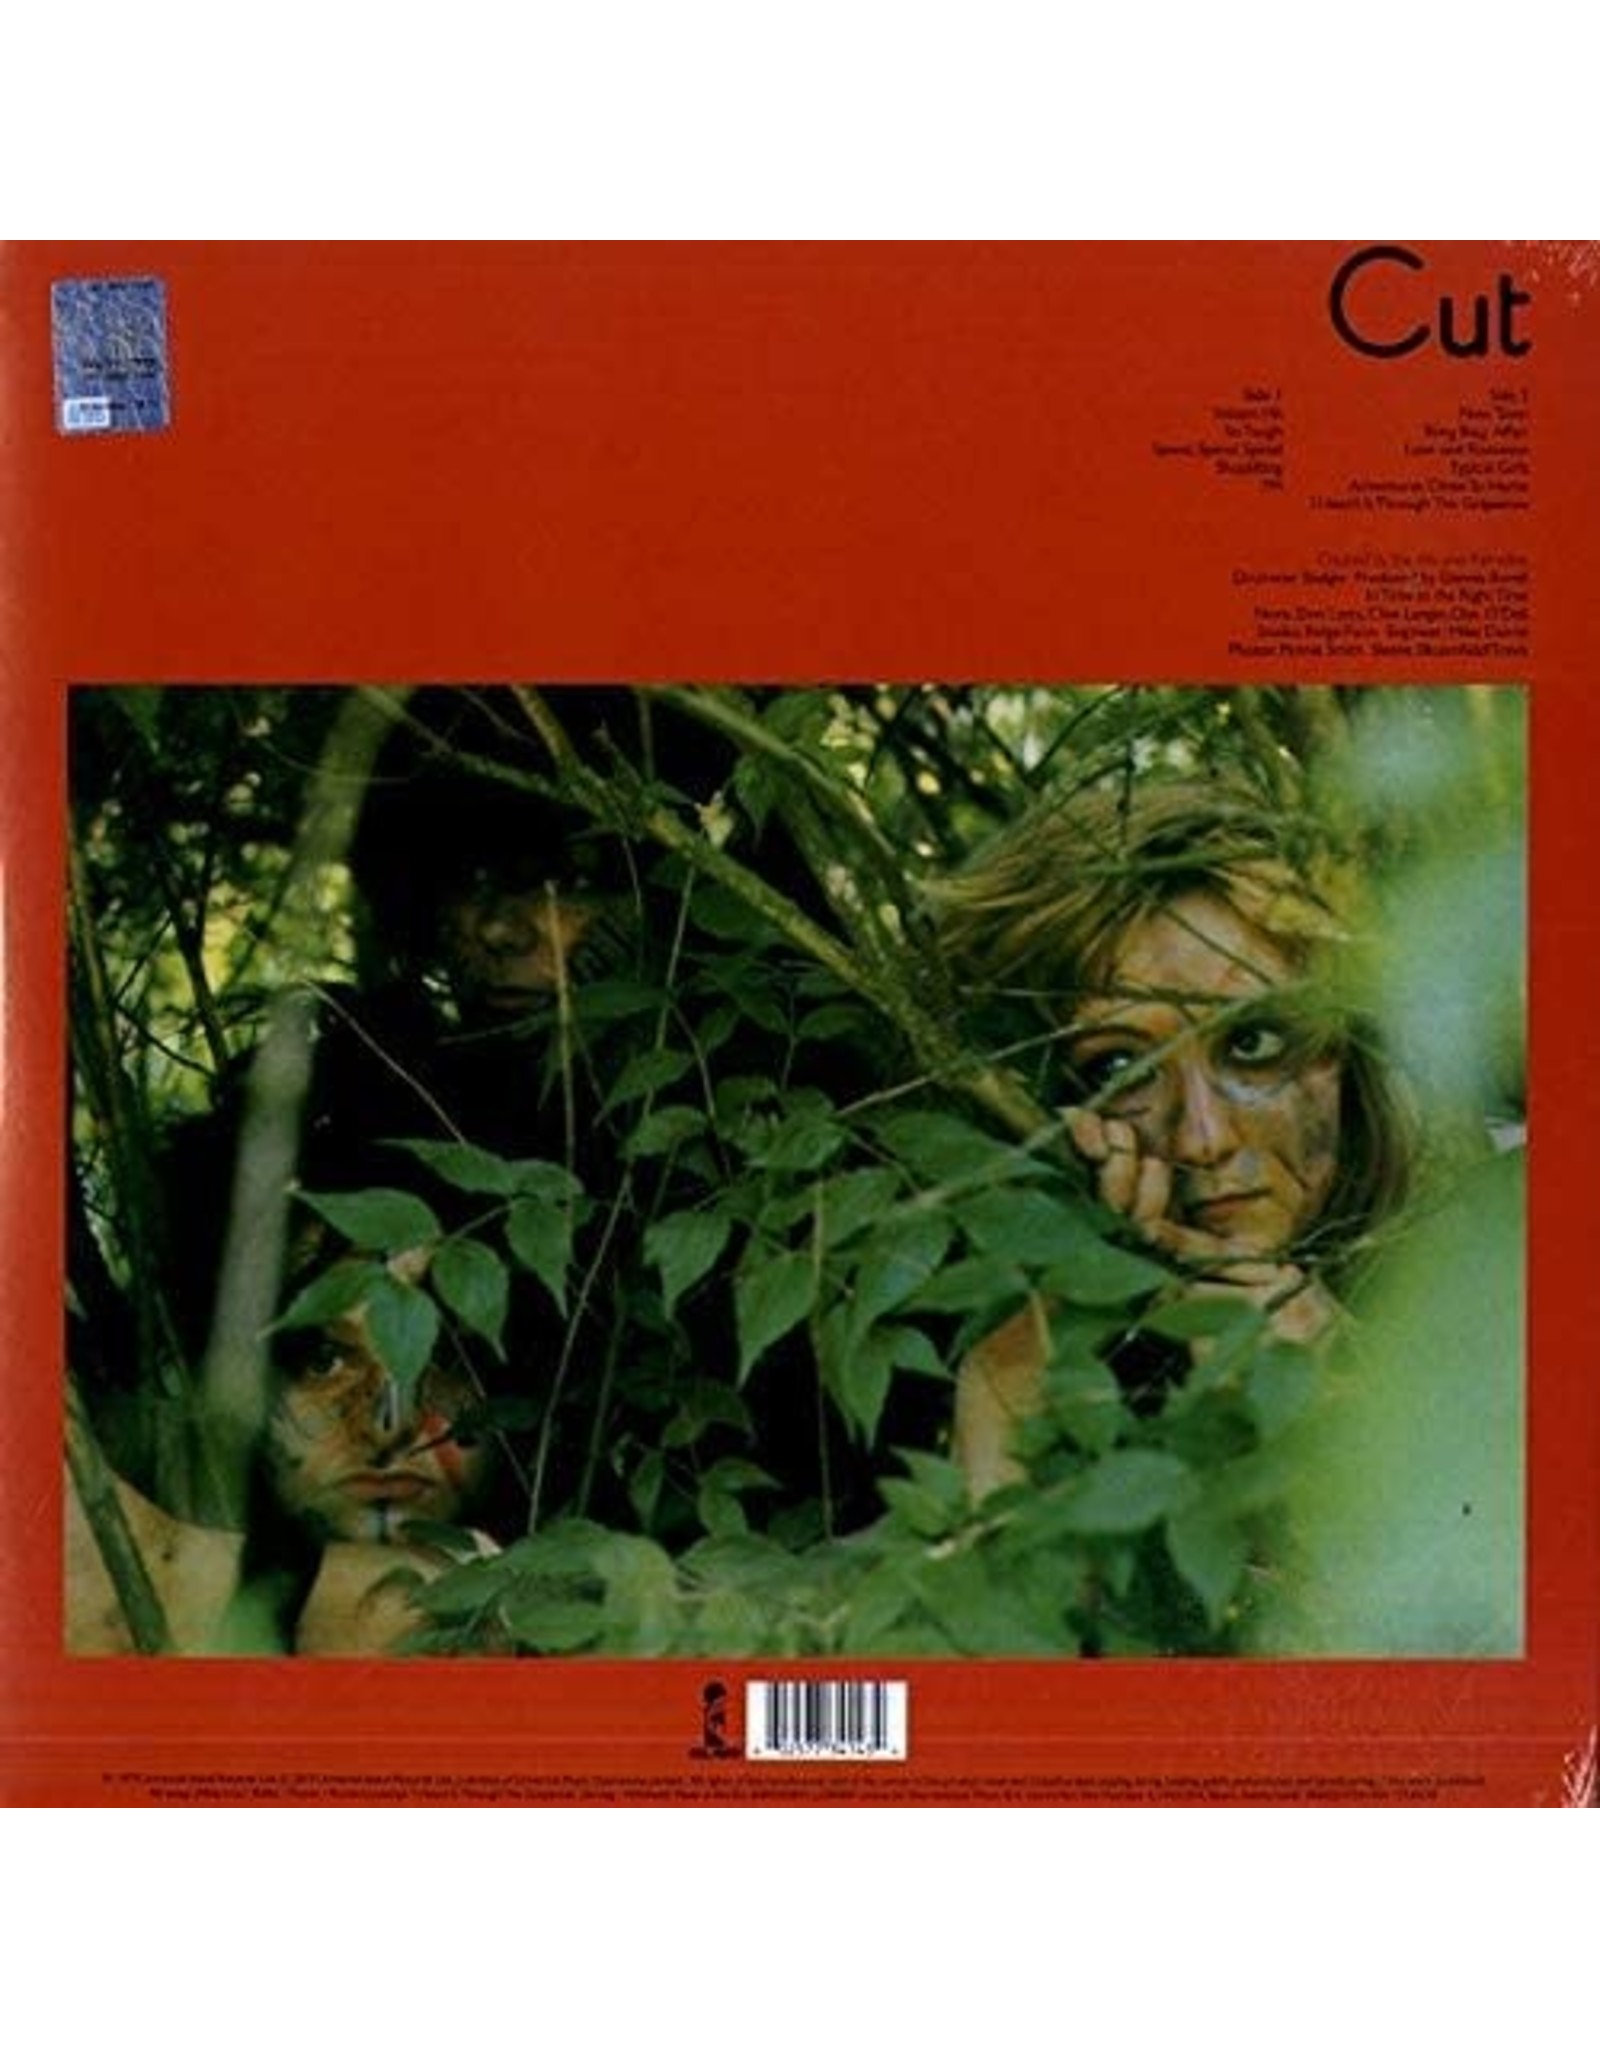 Slits - Cut (Special Edition)